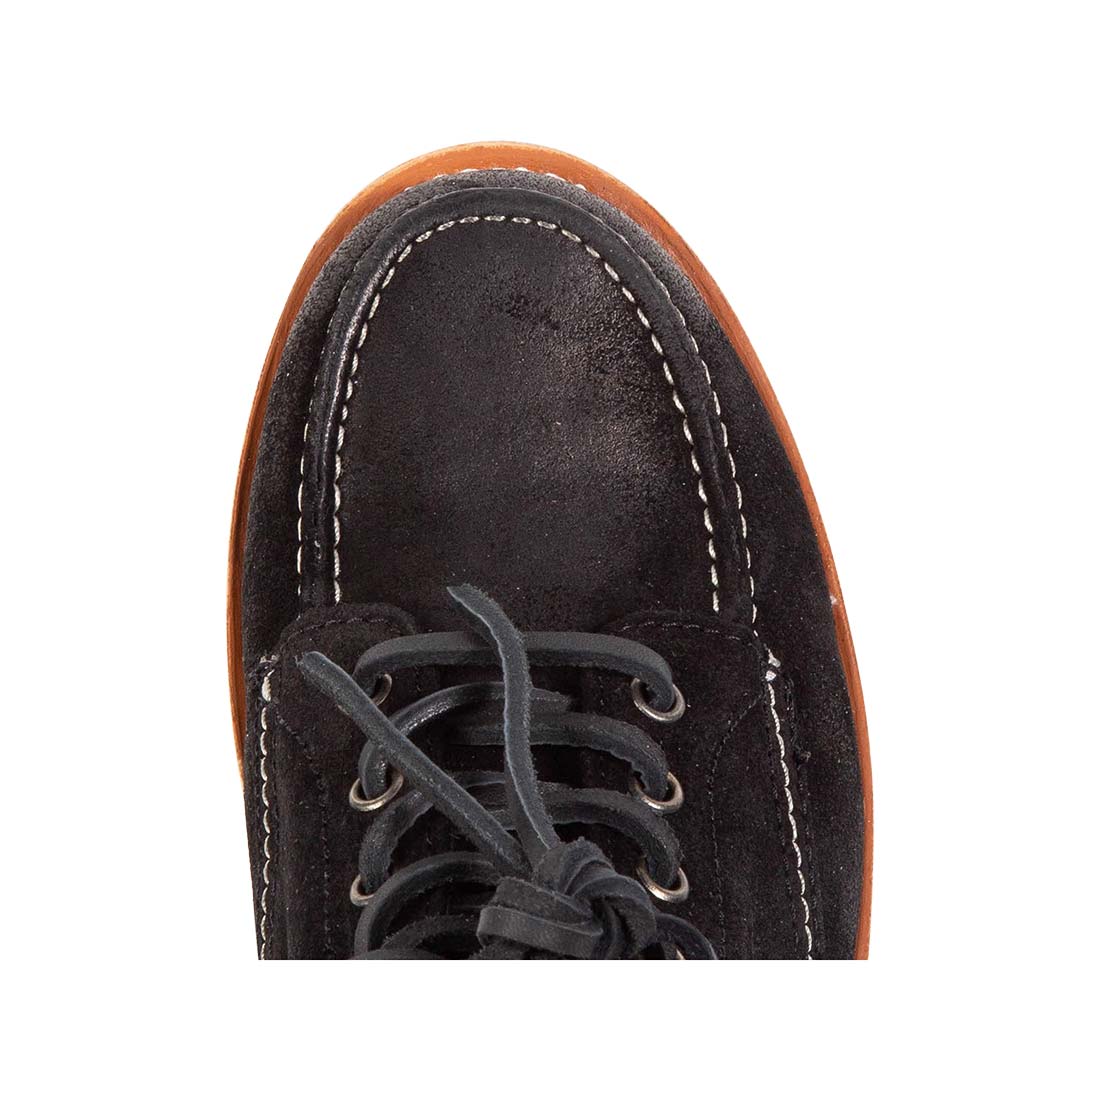 Top view showing round toe and leather lacing on FREEBIRD men's Carbon black suede shoe